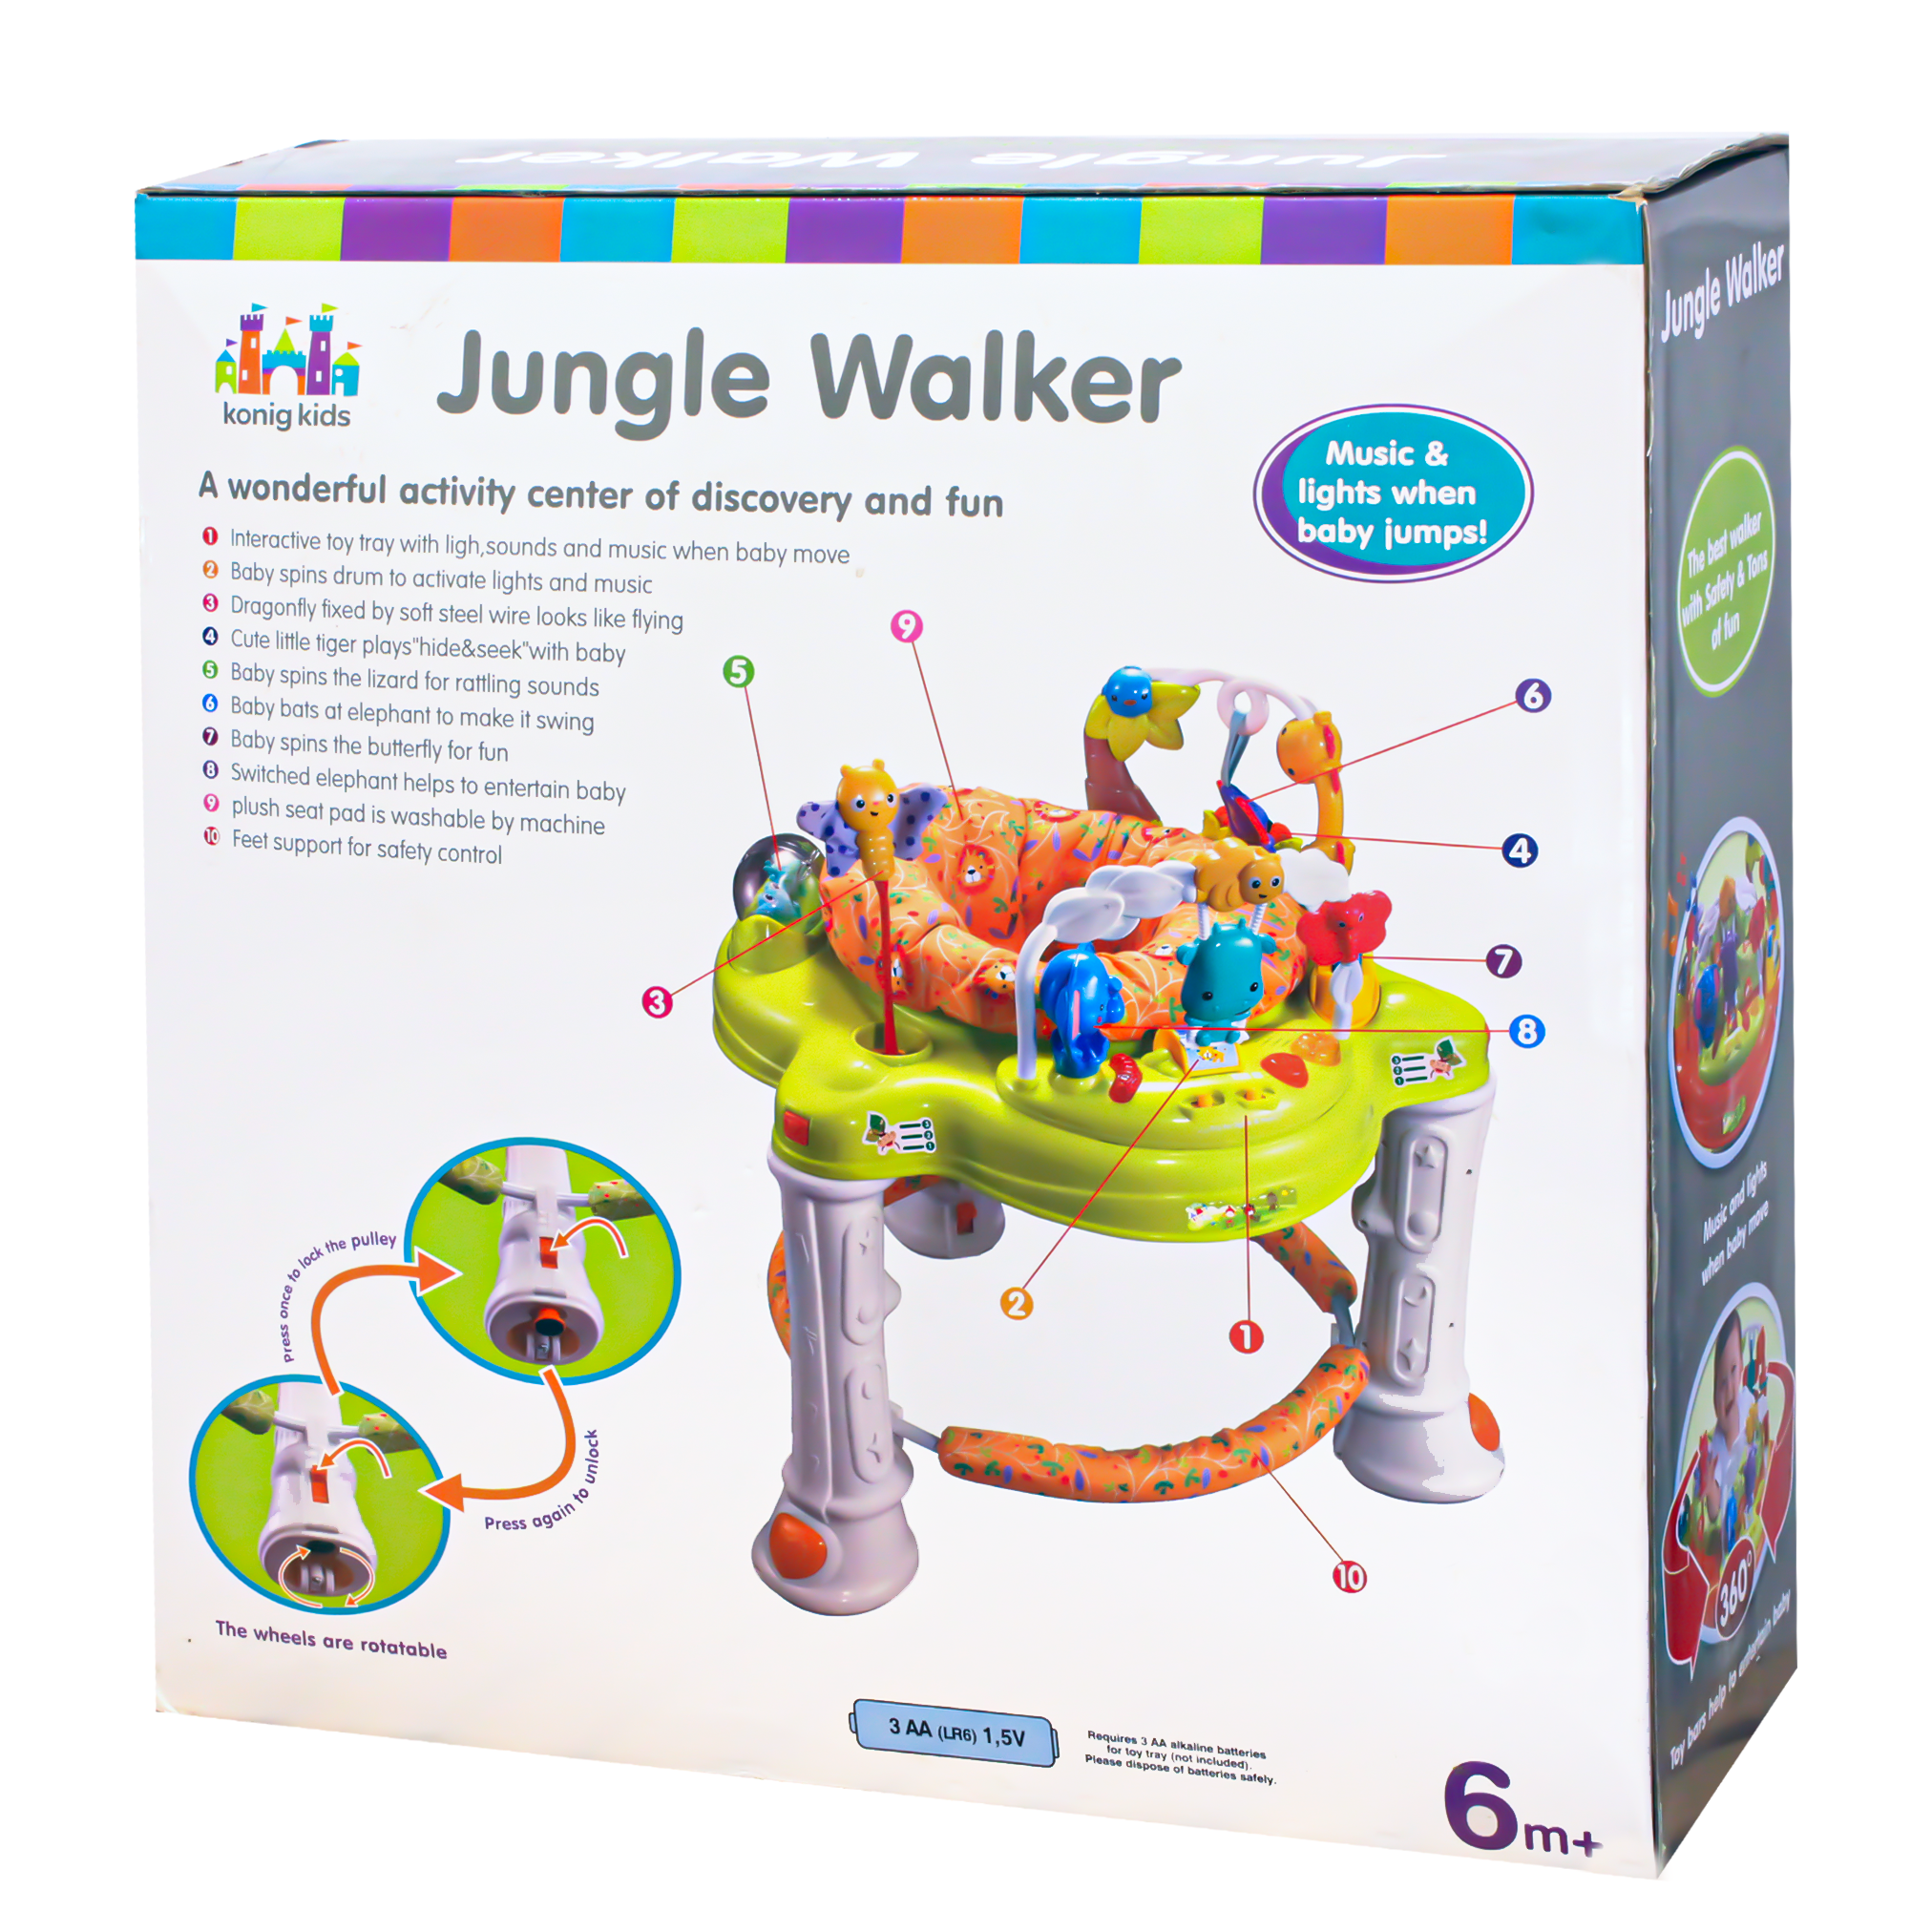 Multi-functional baby walker Happy jungle walker with music, lights and toys for the baby